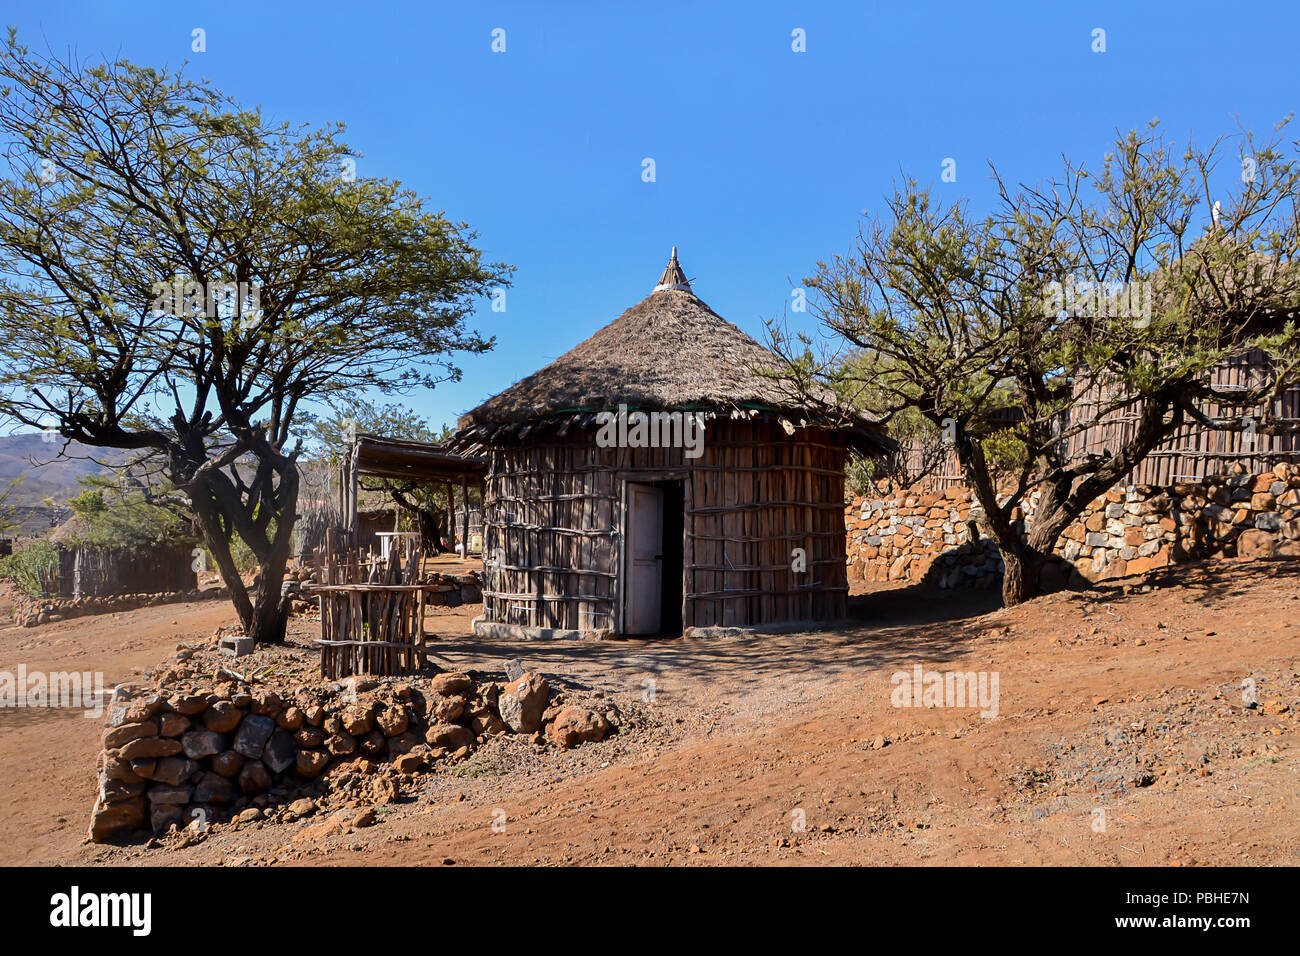 Typical rounded Djiboutian huts in a village in northern Djibouti, Day Forest National Park ( Forêt du Day) in Horn of Africa Stock Photo